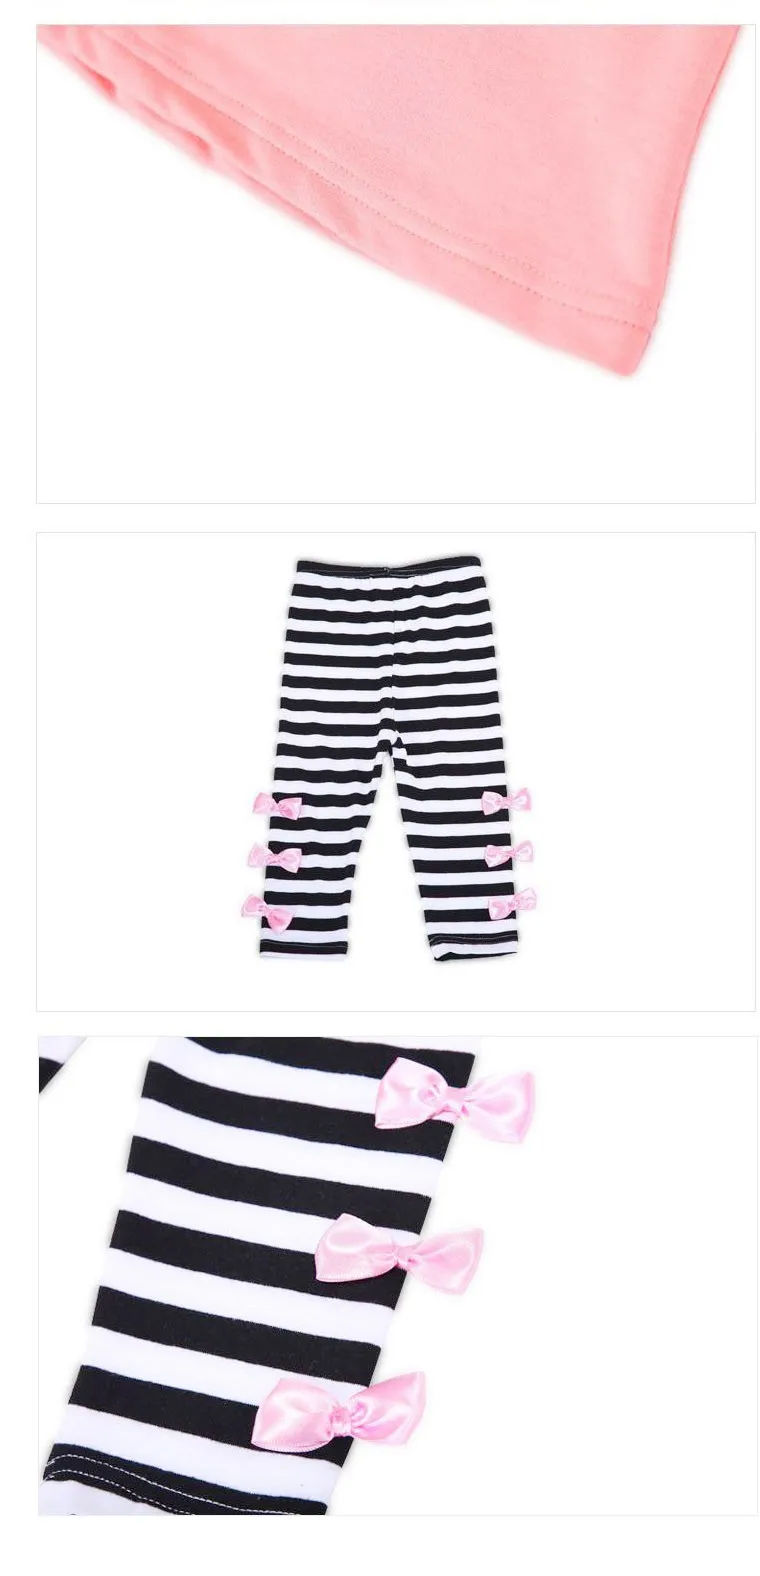 equestrian clothing sets	 Retail and wholesale 2022 spring and autumn toddler girl clothing sets children clothes kids top with bow+striped leggings 2pcs Clothing Sets	